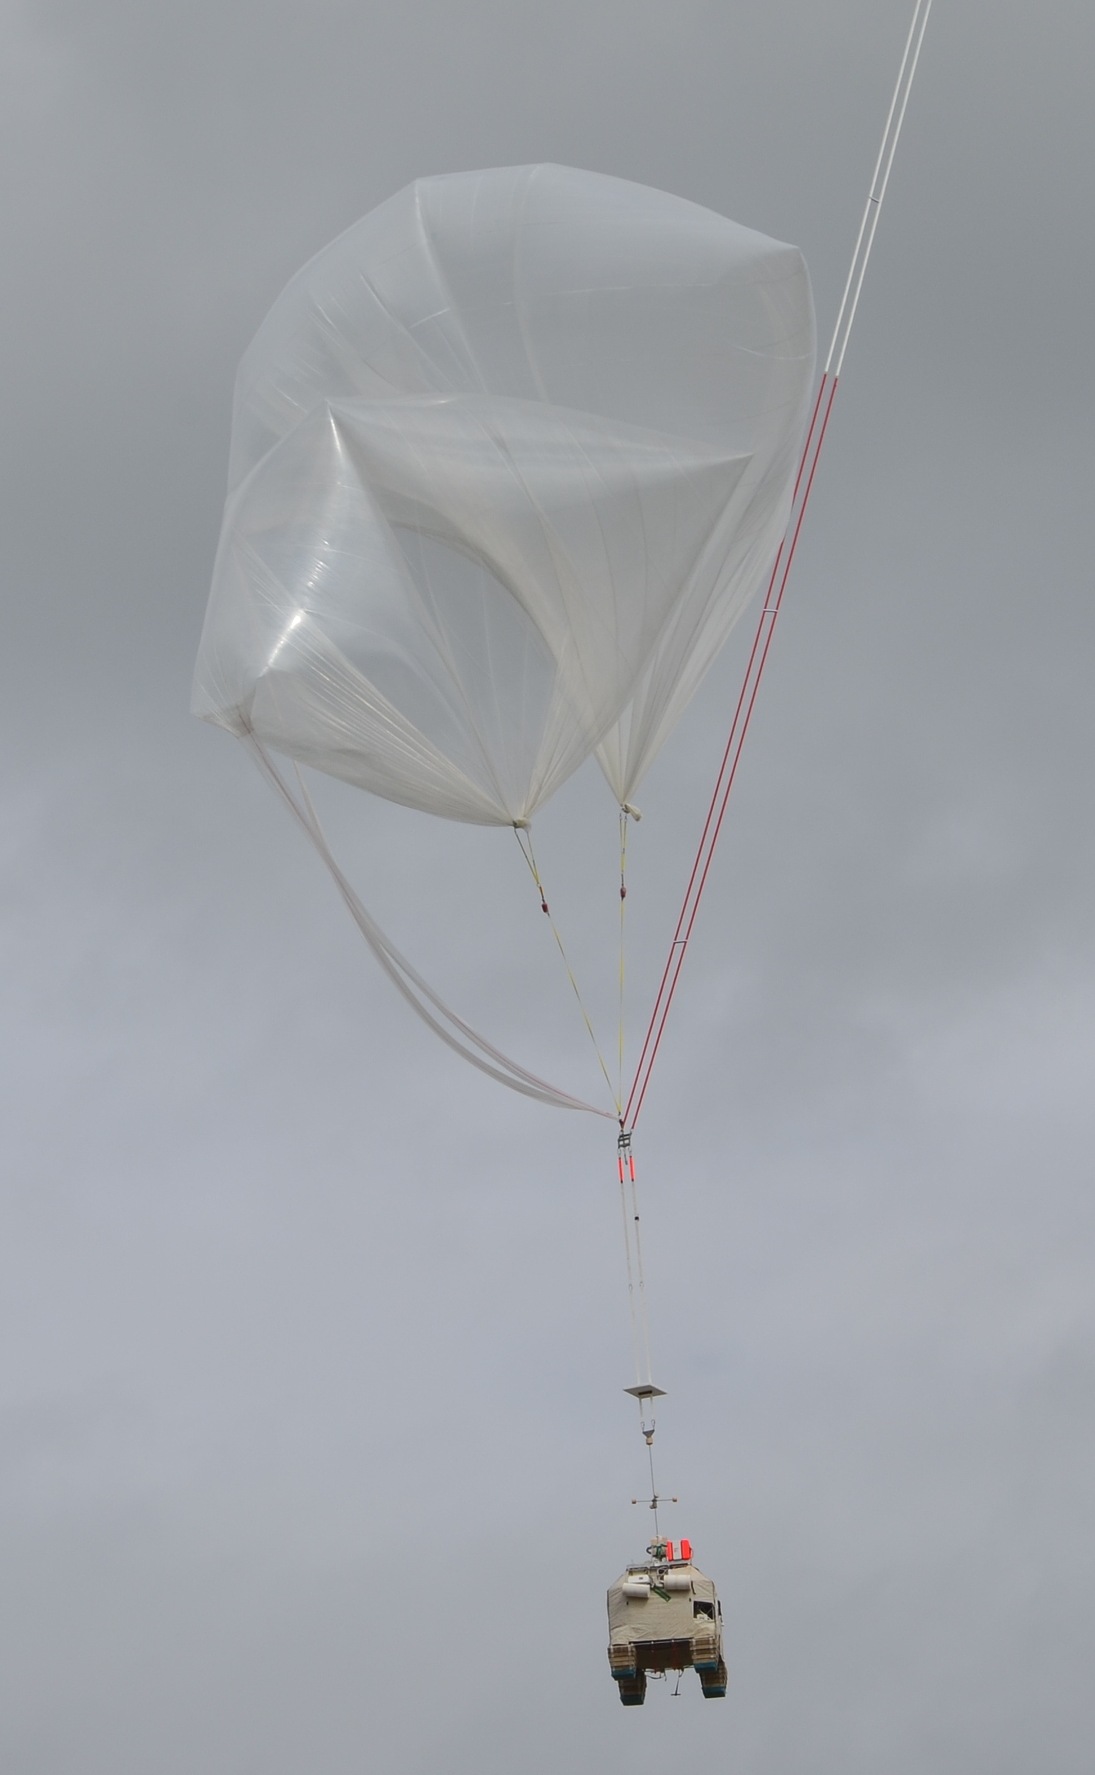 The MIPAS payload ascending after release (Image: CNES)